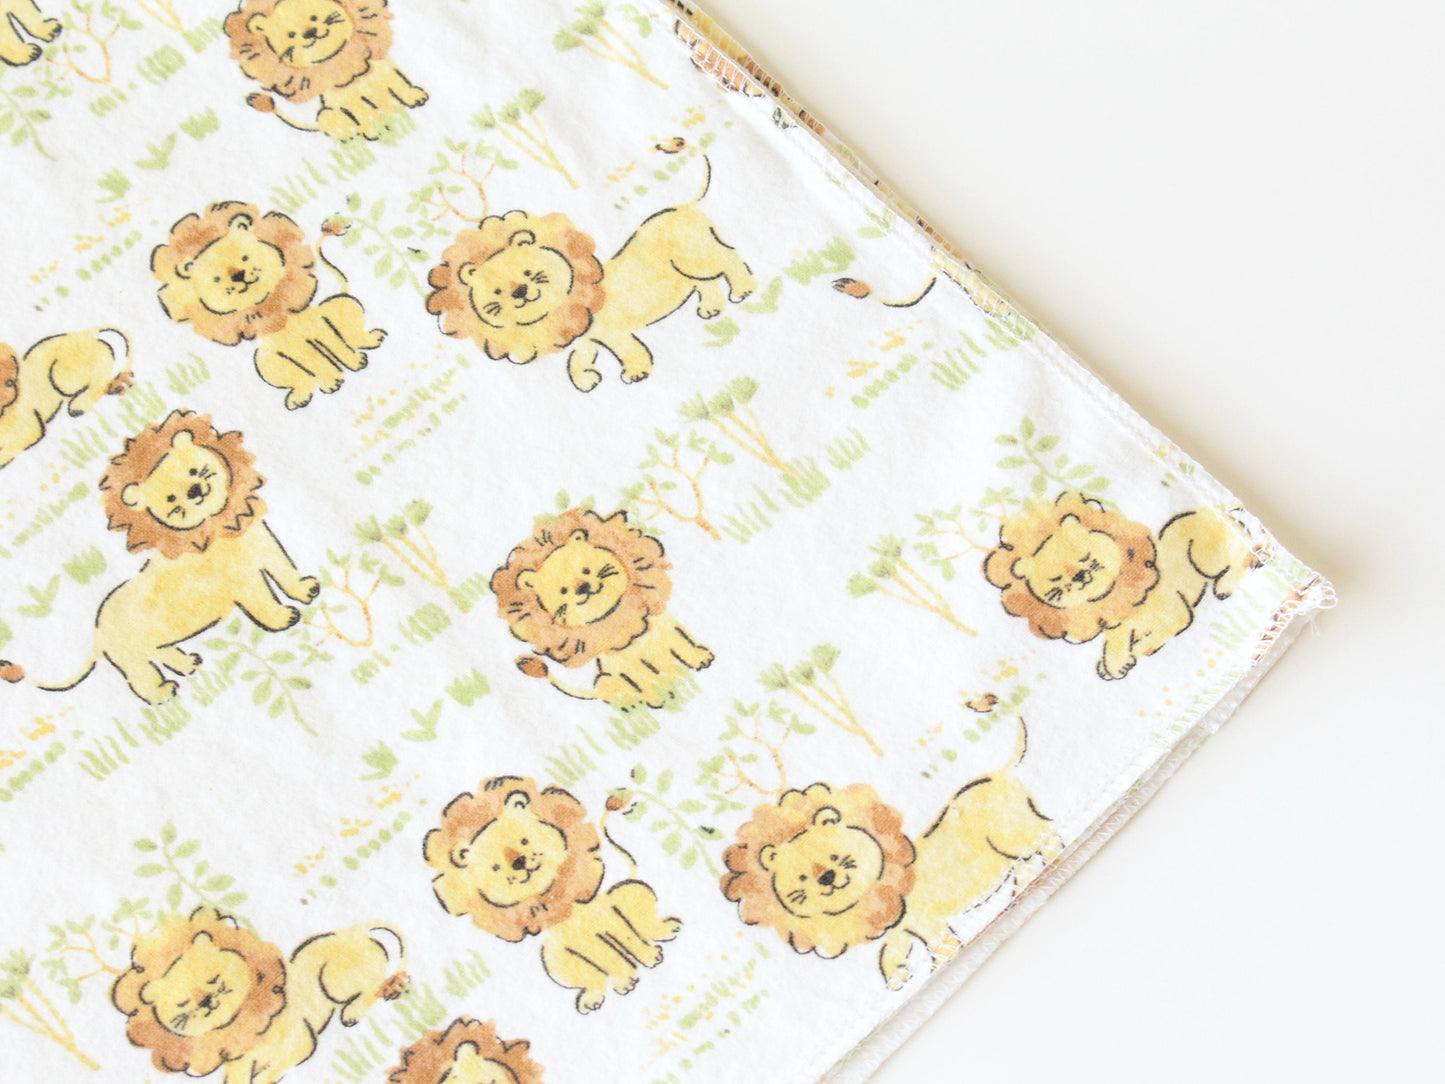 Lion Cub Extra Large Flannel Receiving Blanket Swaddle | Gender Neutral Baby Shower Gift | CPSC Compliant